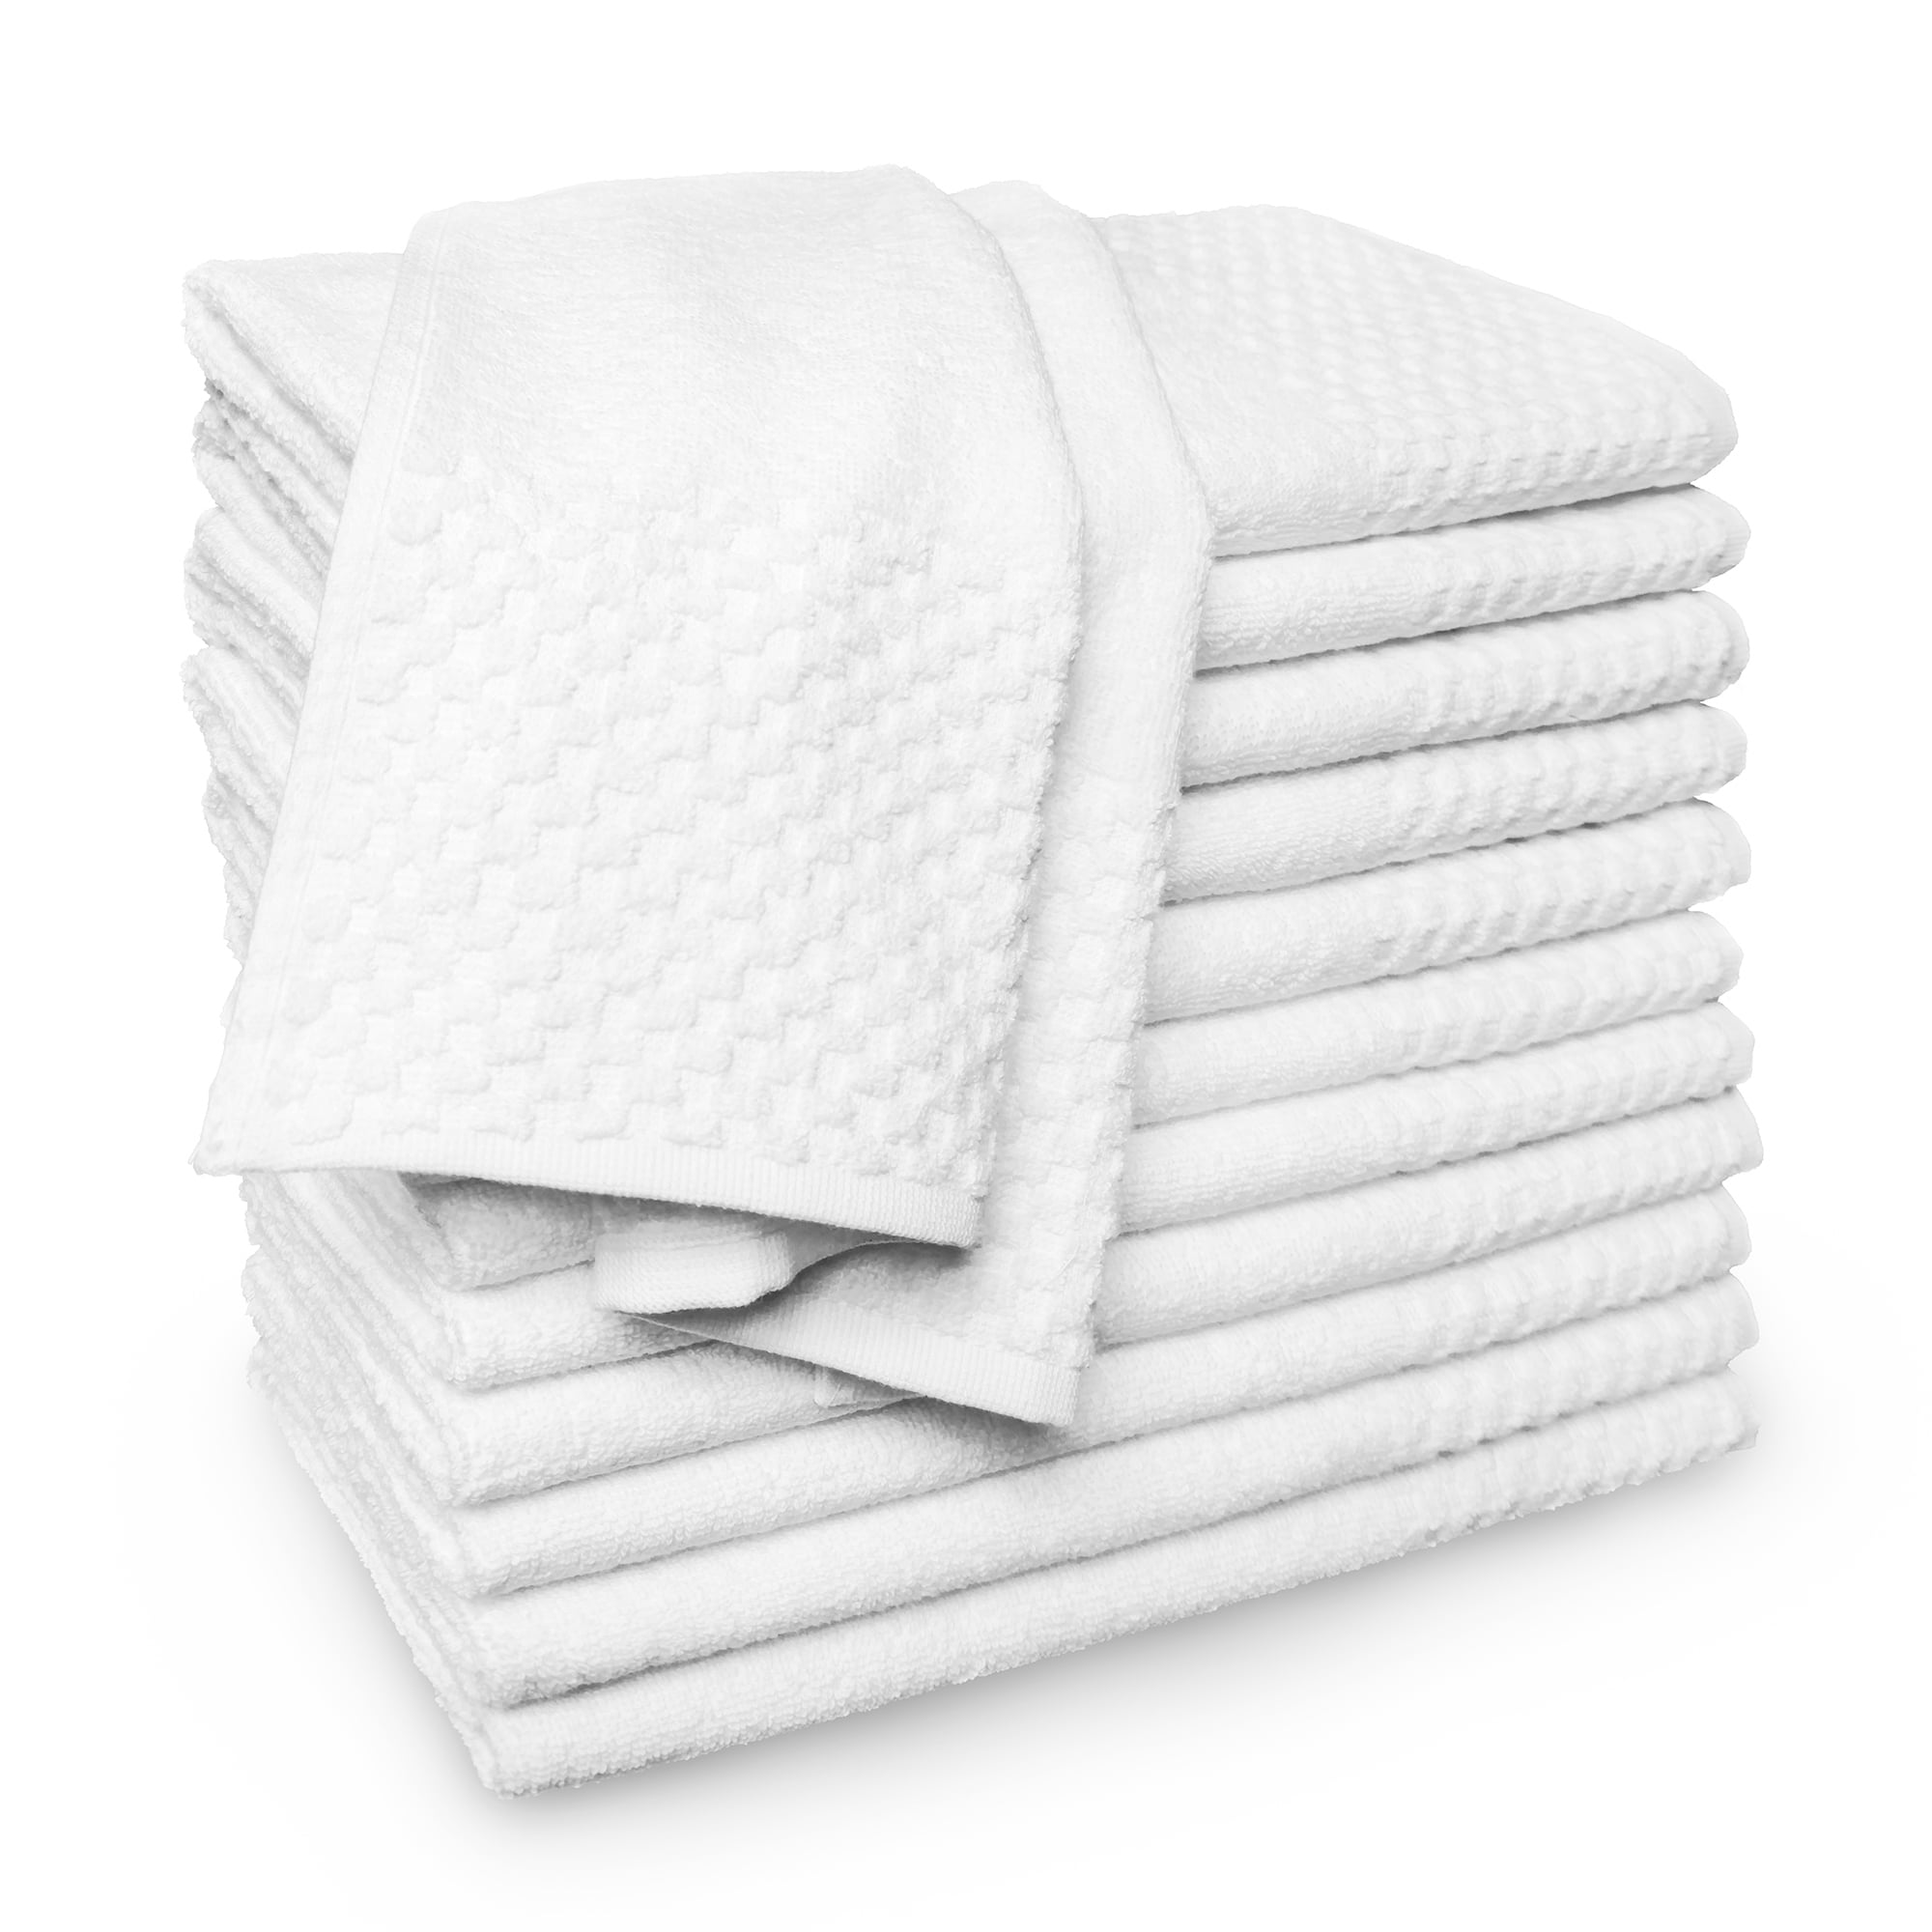 Cheap Small Hand Towels Cream 30 x 85cm Budget Quality 100% Cotton Set of 12